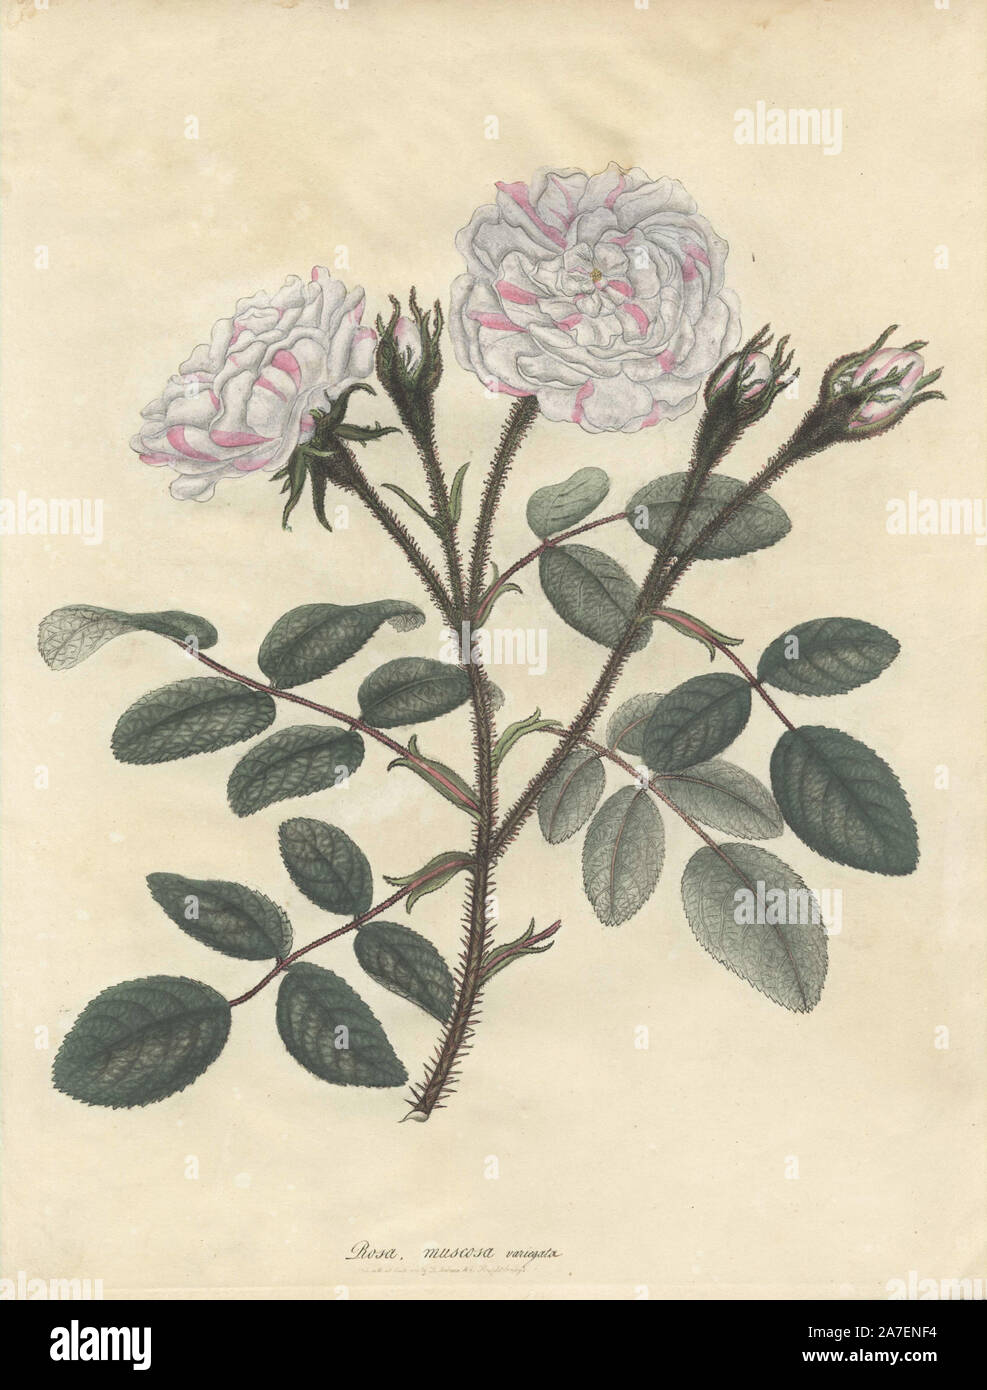 Variegated moss rose, Rosa muscosa variegata. Handcoloured copperplate botanical drawn, engraved and coloured by Henry Charles Andrews for his own 'Roses, a monograph of the genus Rosa,' London, 1806. Andrews was an English botanist, artist and engraver who published the 'Botanist's Repository' from 1797 to 1812 and separate volumes on roses, geraniums and heaths. Stock Photo